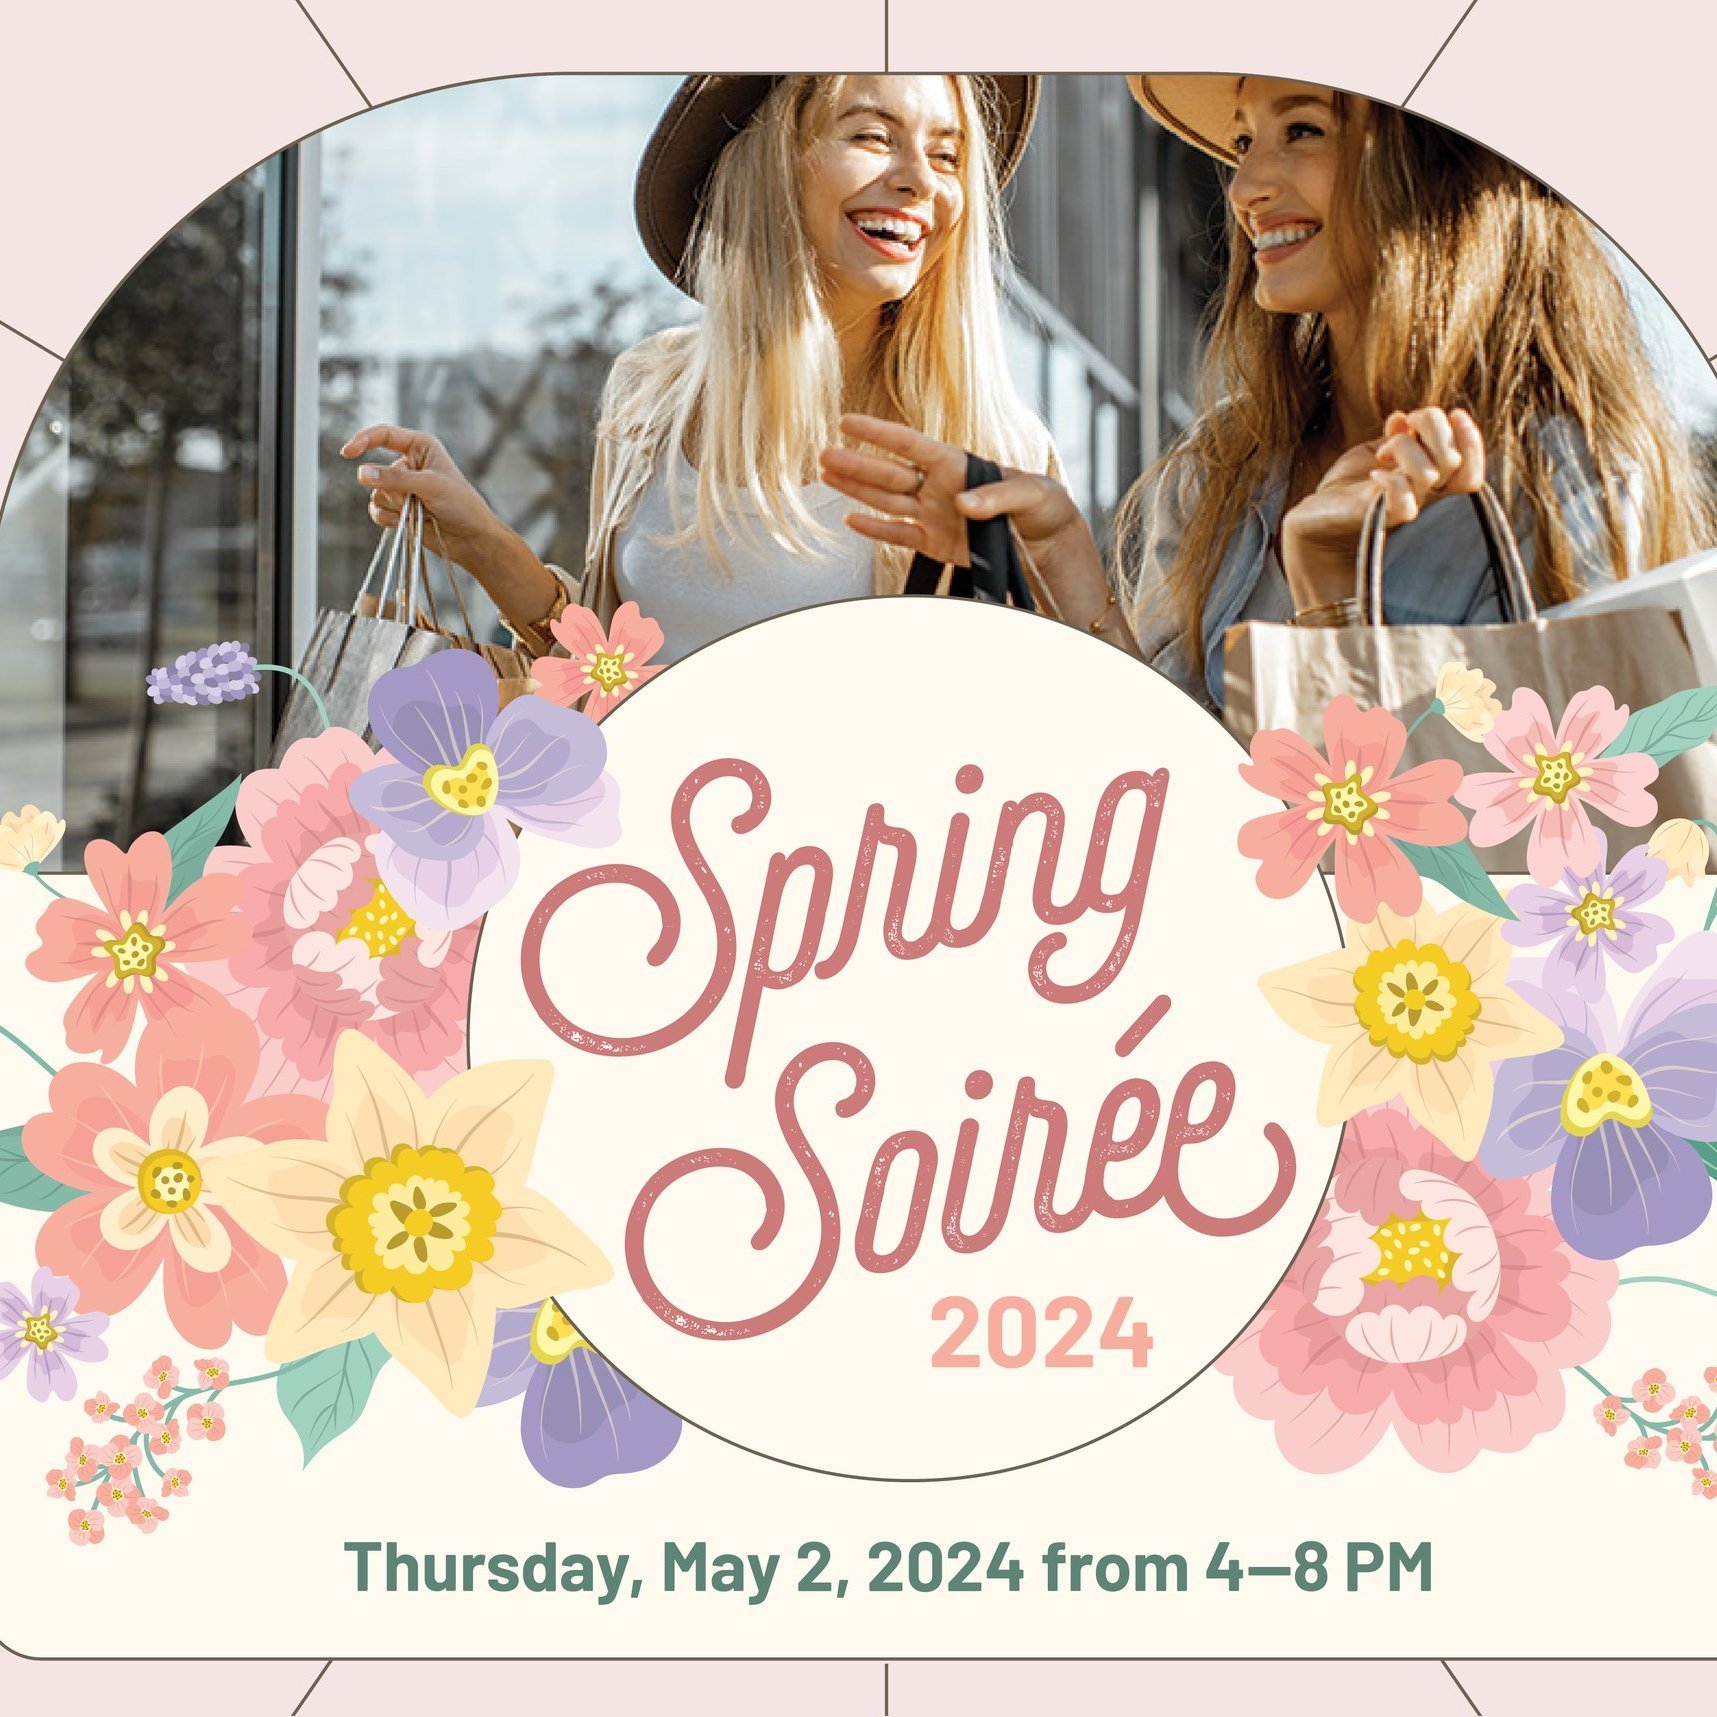 So many reasons to visit the Suites during the Downtown Spring Soiree! 
✅ closet sale featuring boutique clothing for up to 75% off from @corazonsterling and @gigiselkhart (plus personal items from @grazebyerica)
✅ 40% off sample furniture at @interi